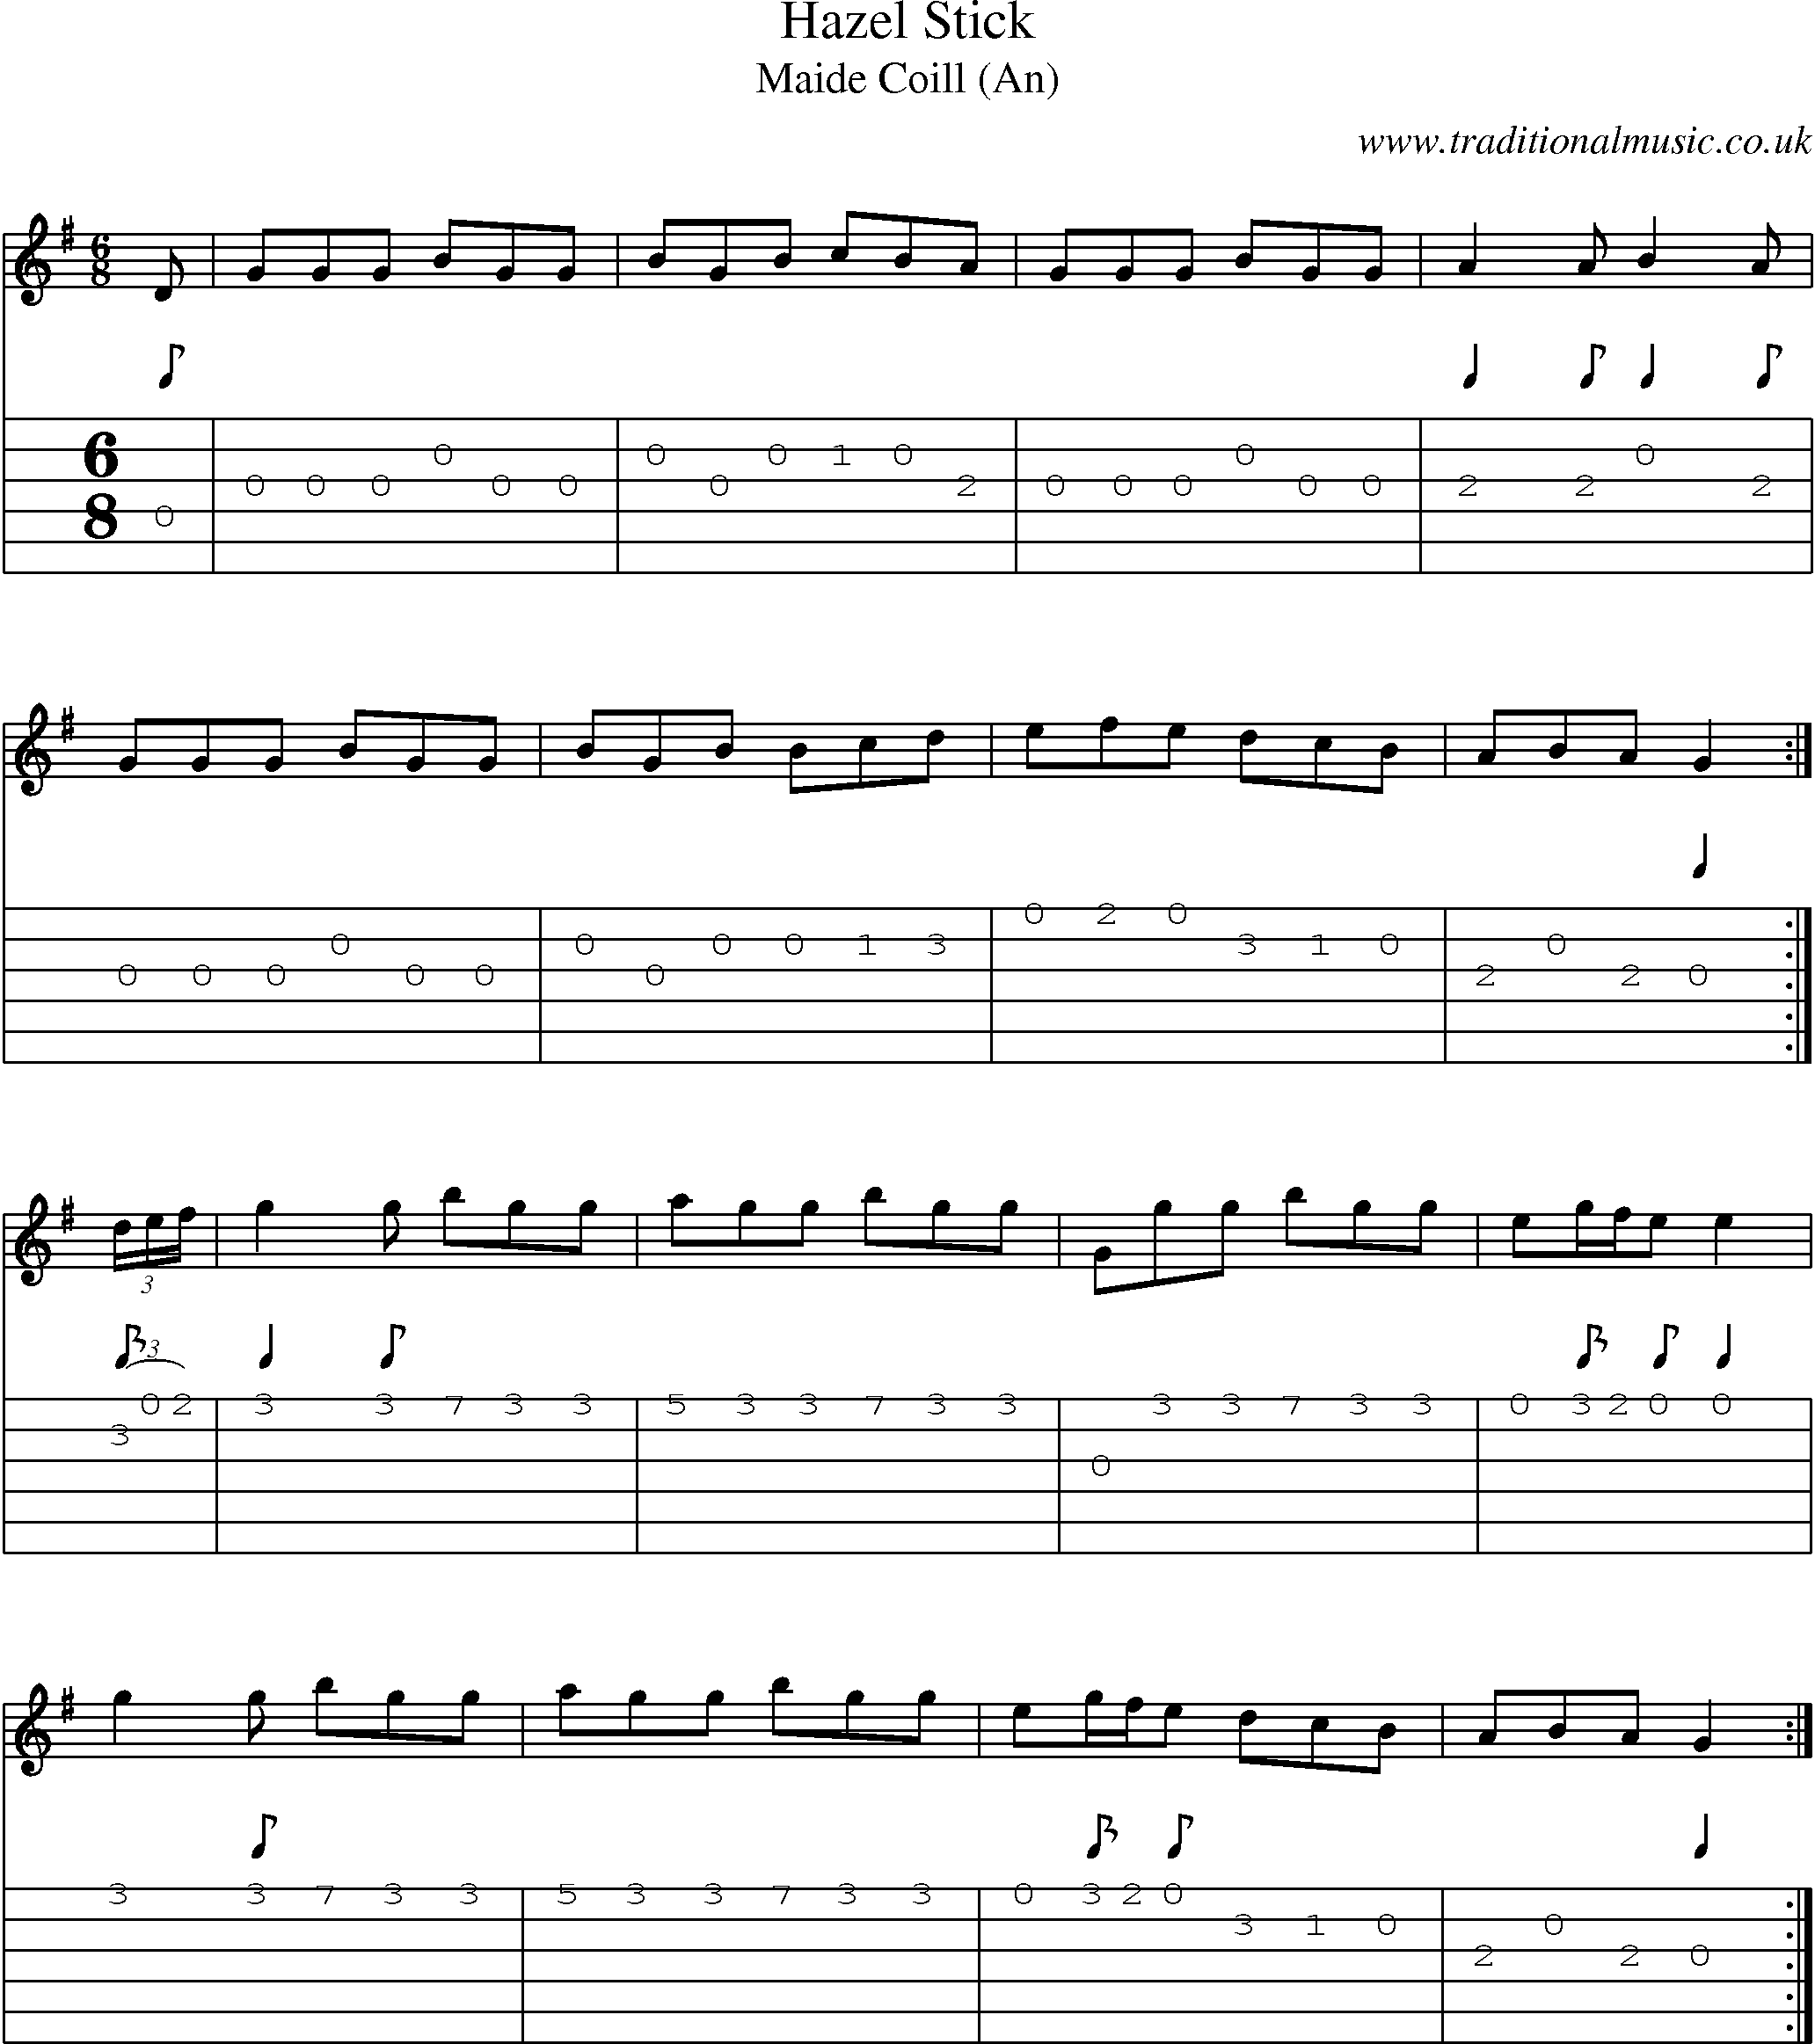 Music Score and Guitar Tabs for Hazel Stick